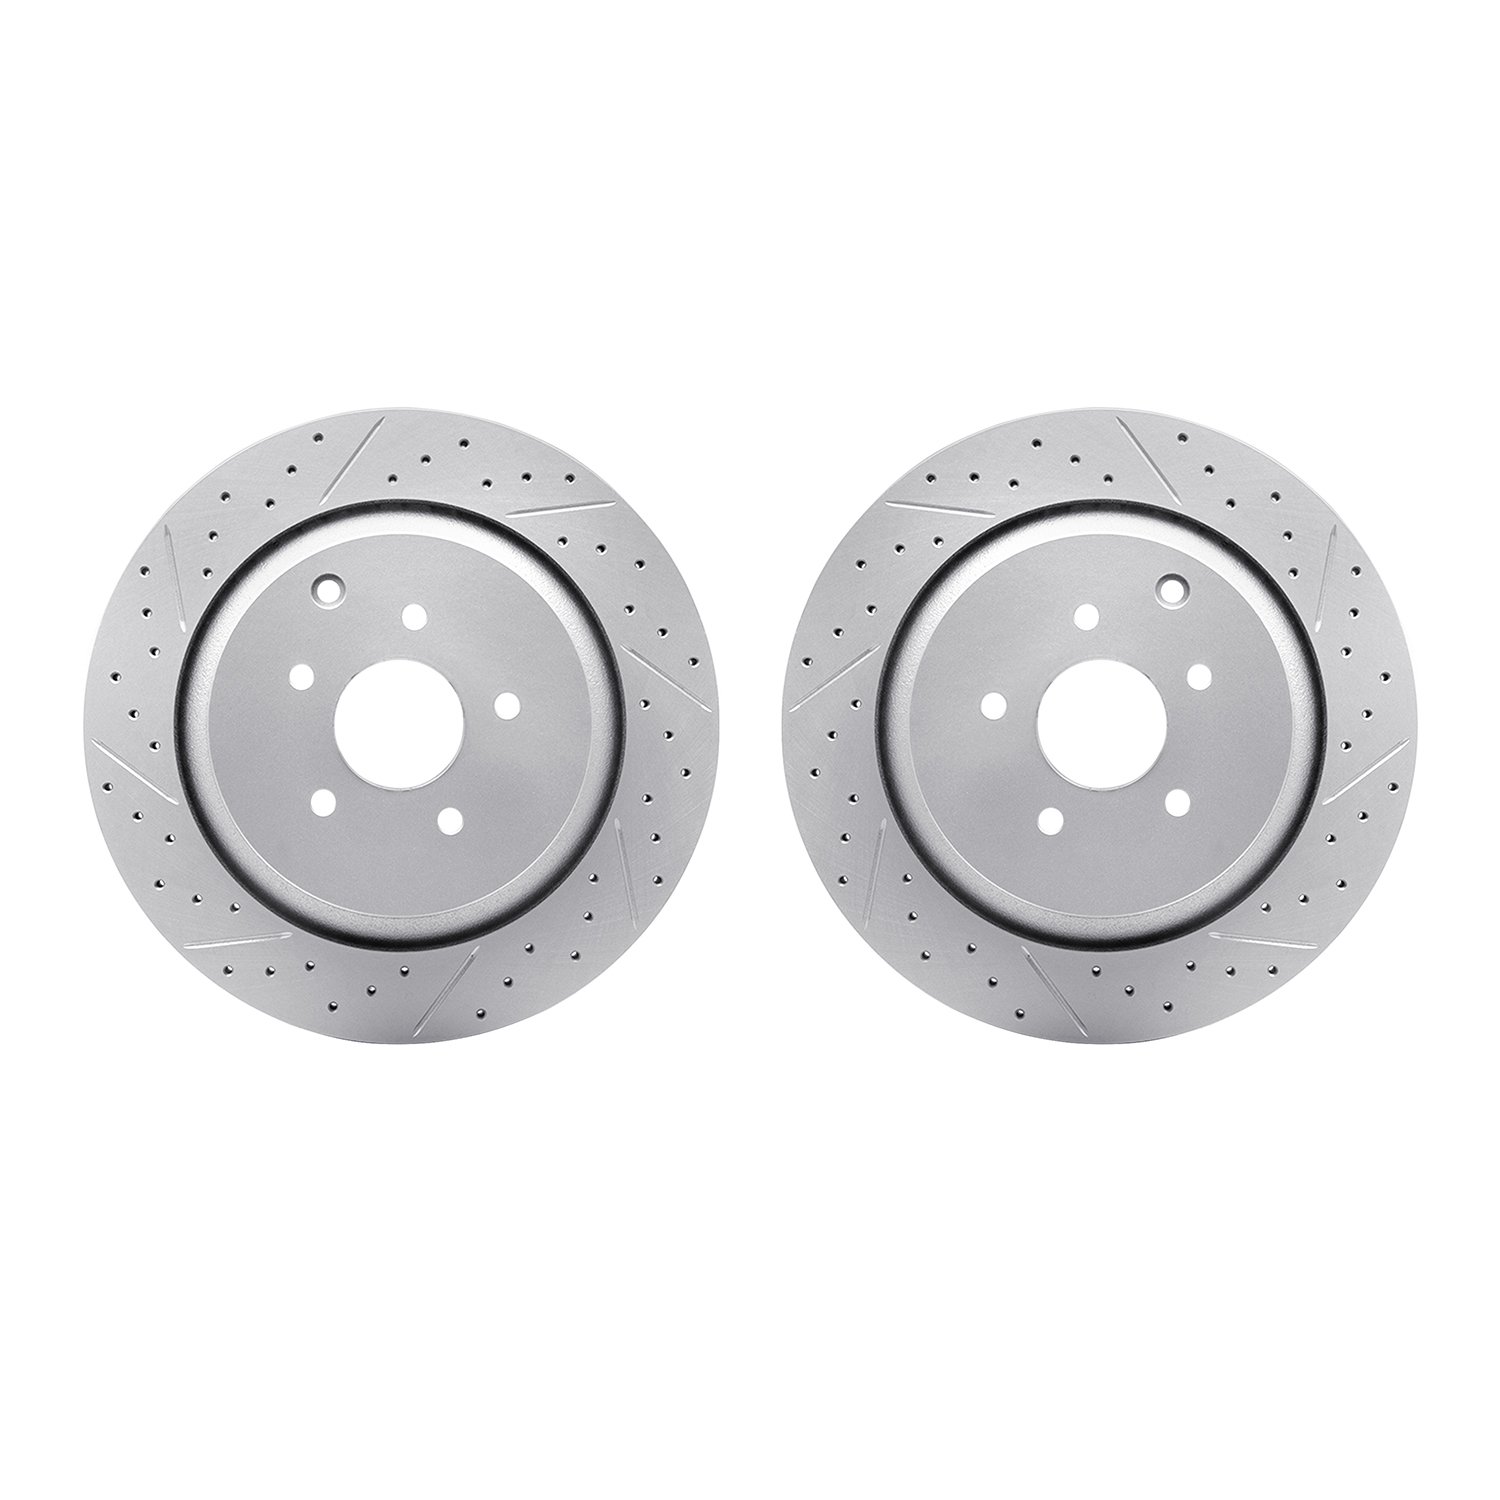 2002-68007 Geoperformance Drilled/Slotted Brake Rotors, Fits Select Infiniti/Nissan, Position: Rear